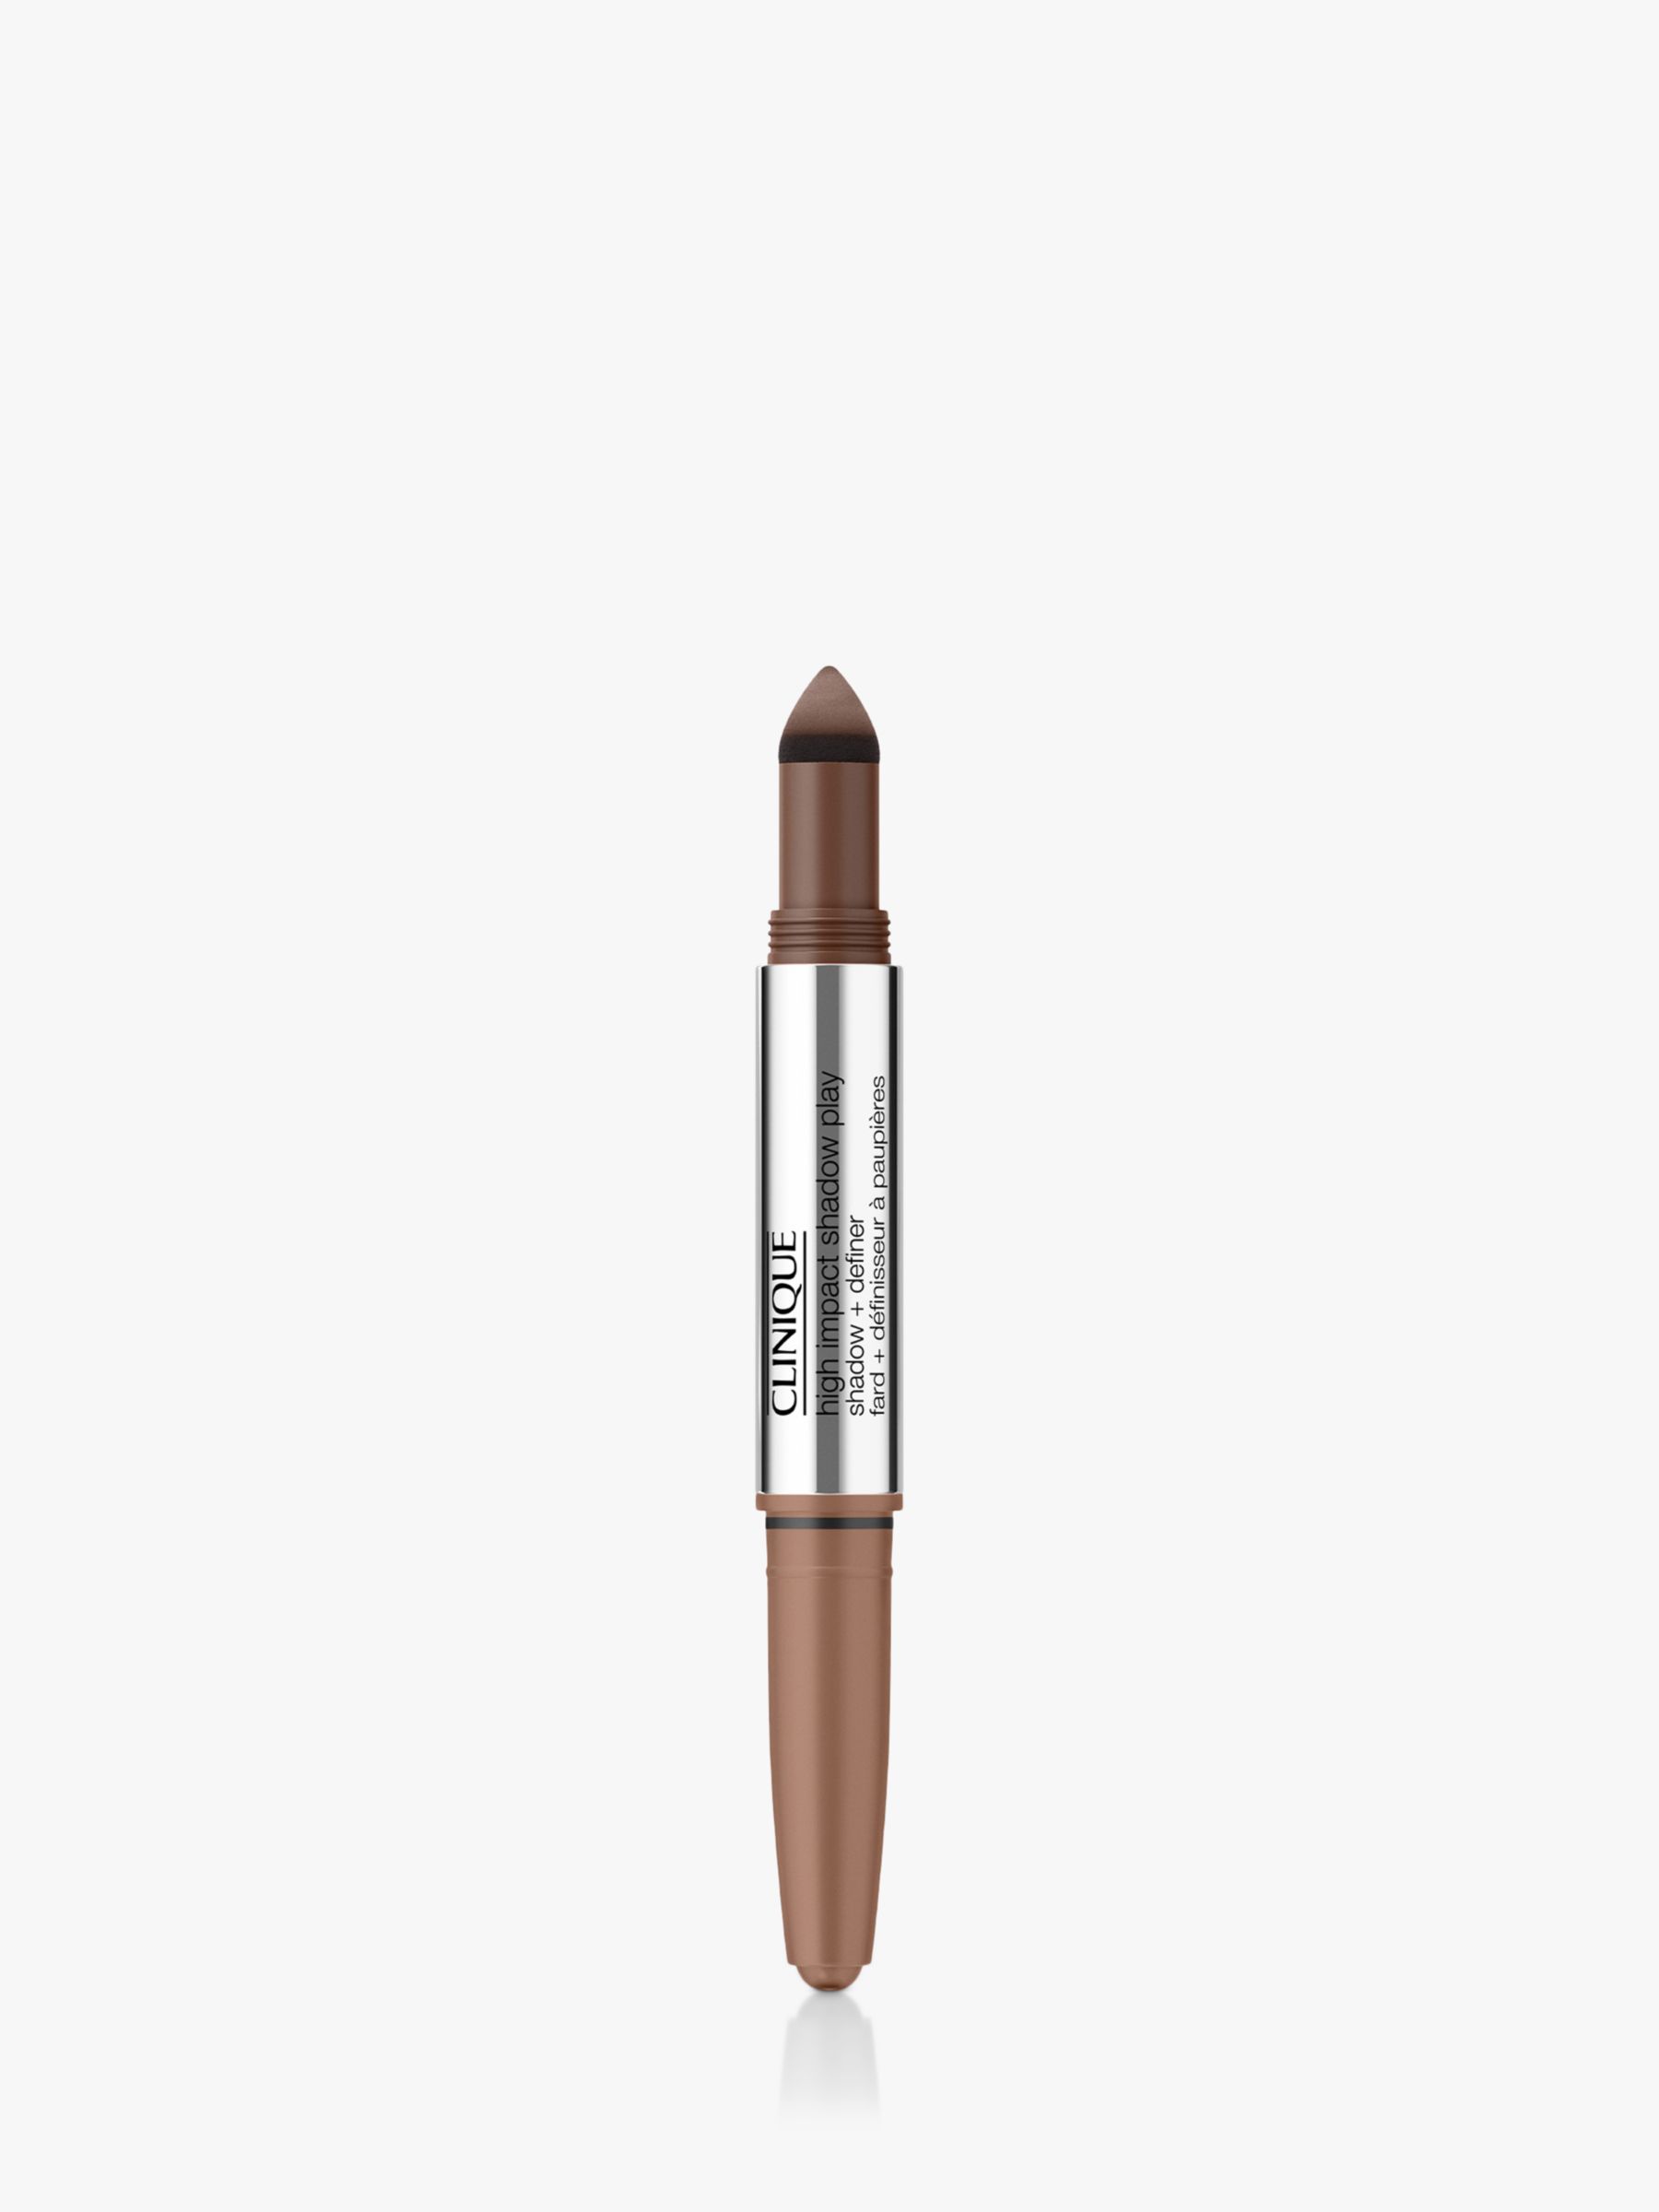 Clinique High Impact Shadow Play Shadow & Definer, Double Latte 1